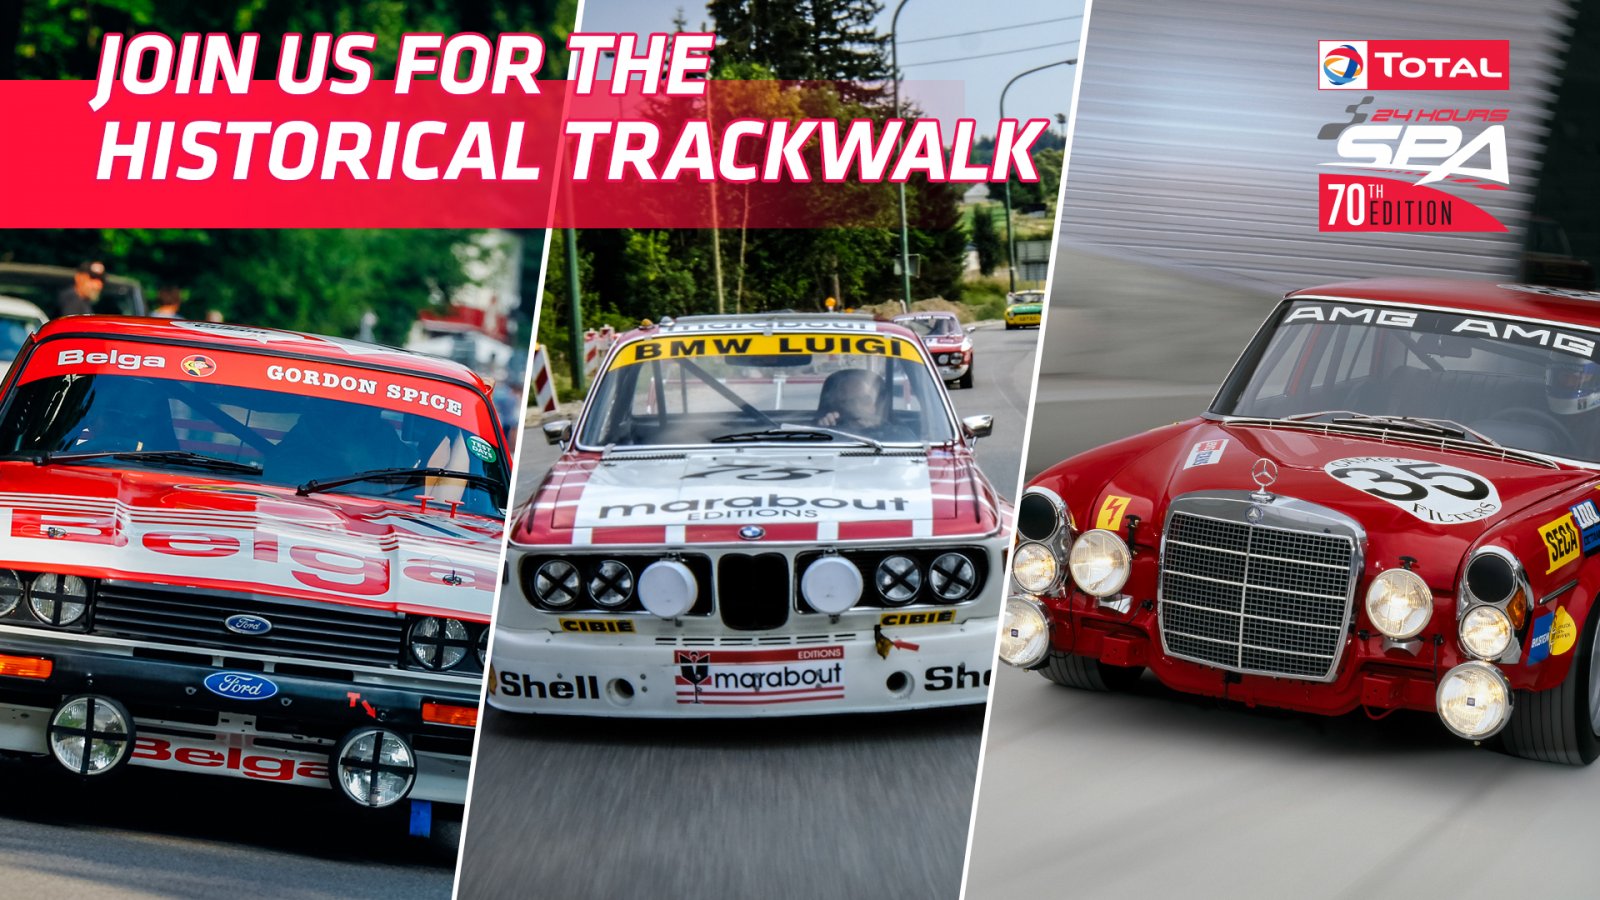 Superb collection of vintage racing machinery to go on display as part of 70th edition Total 24 Hours of Spa celebrations